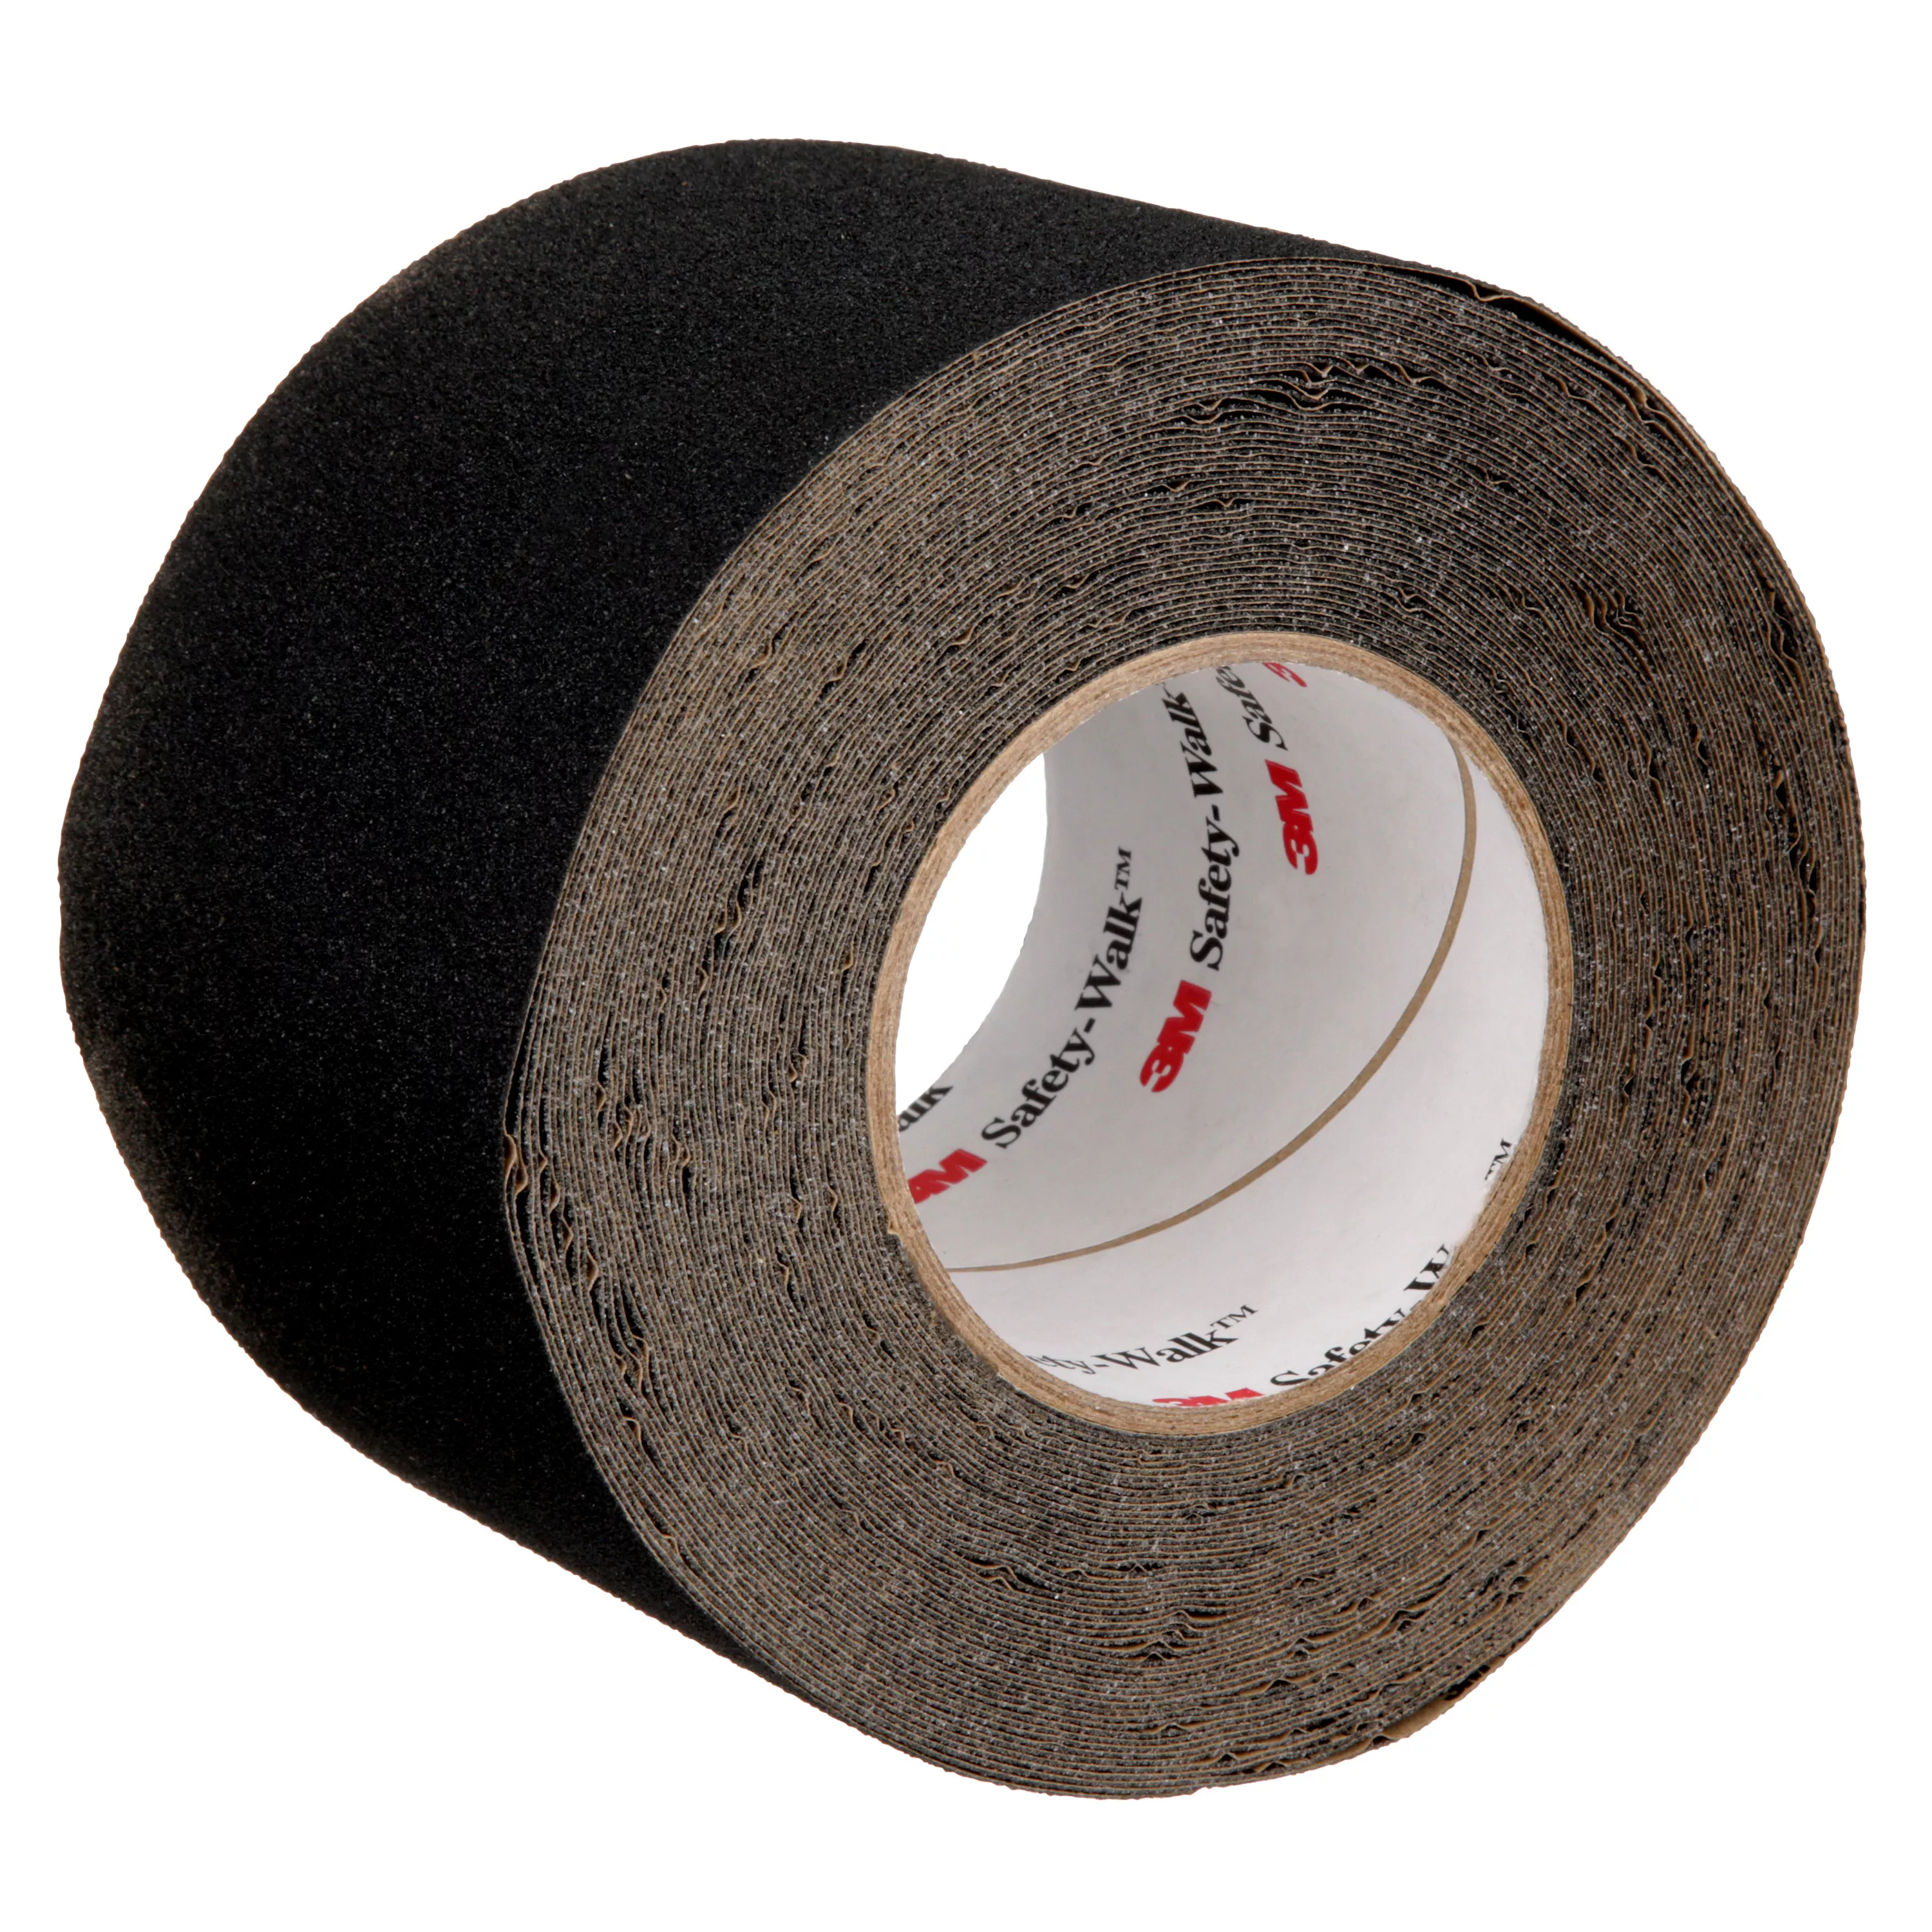 3M™ Safety-Walk™ Slip-Resistant General Purpose Tapes & Treads 610,
Black, 4 in x 60 ft, Roll, 1/Case